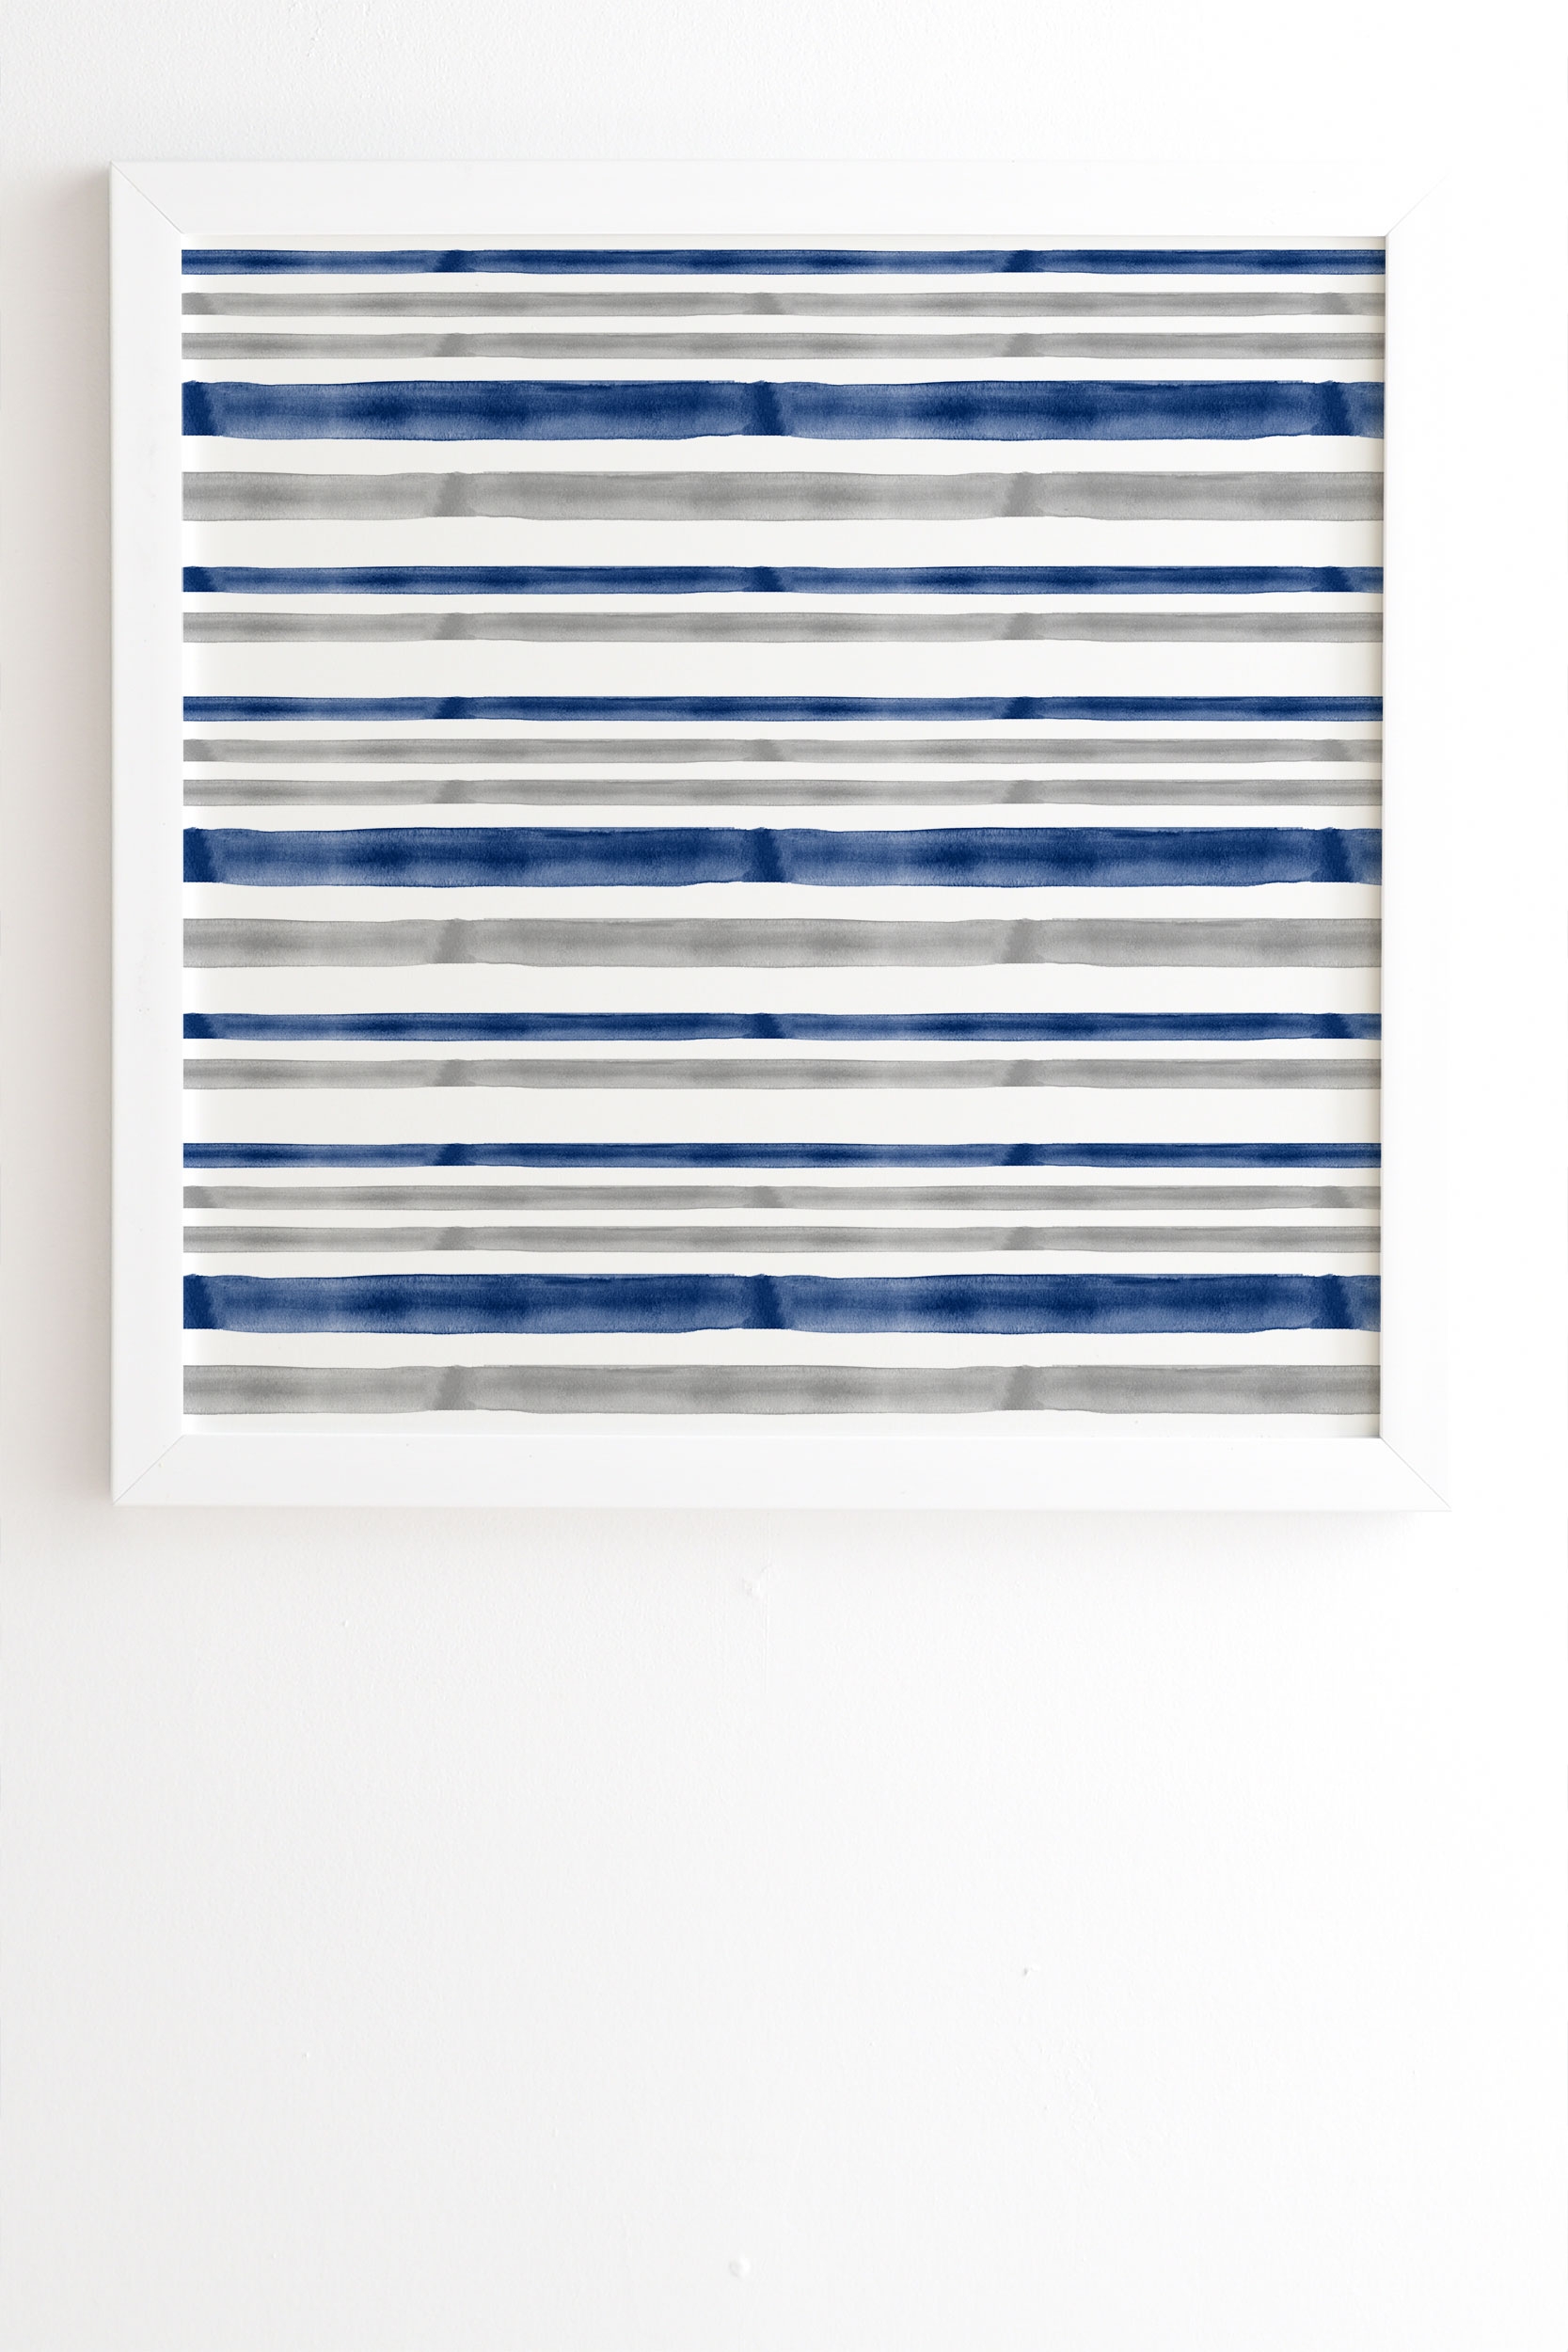 Watercolor Stripes Grey Blue by Little Arrow Design Co - Framed Wall Art Basic White 8" x 9.5" - Image 1